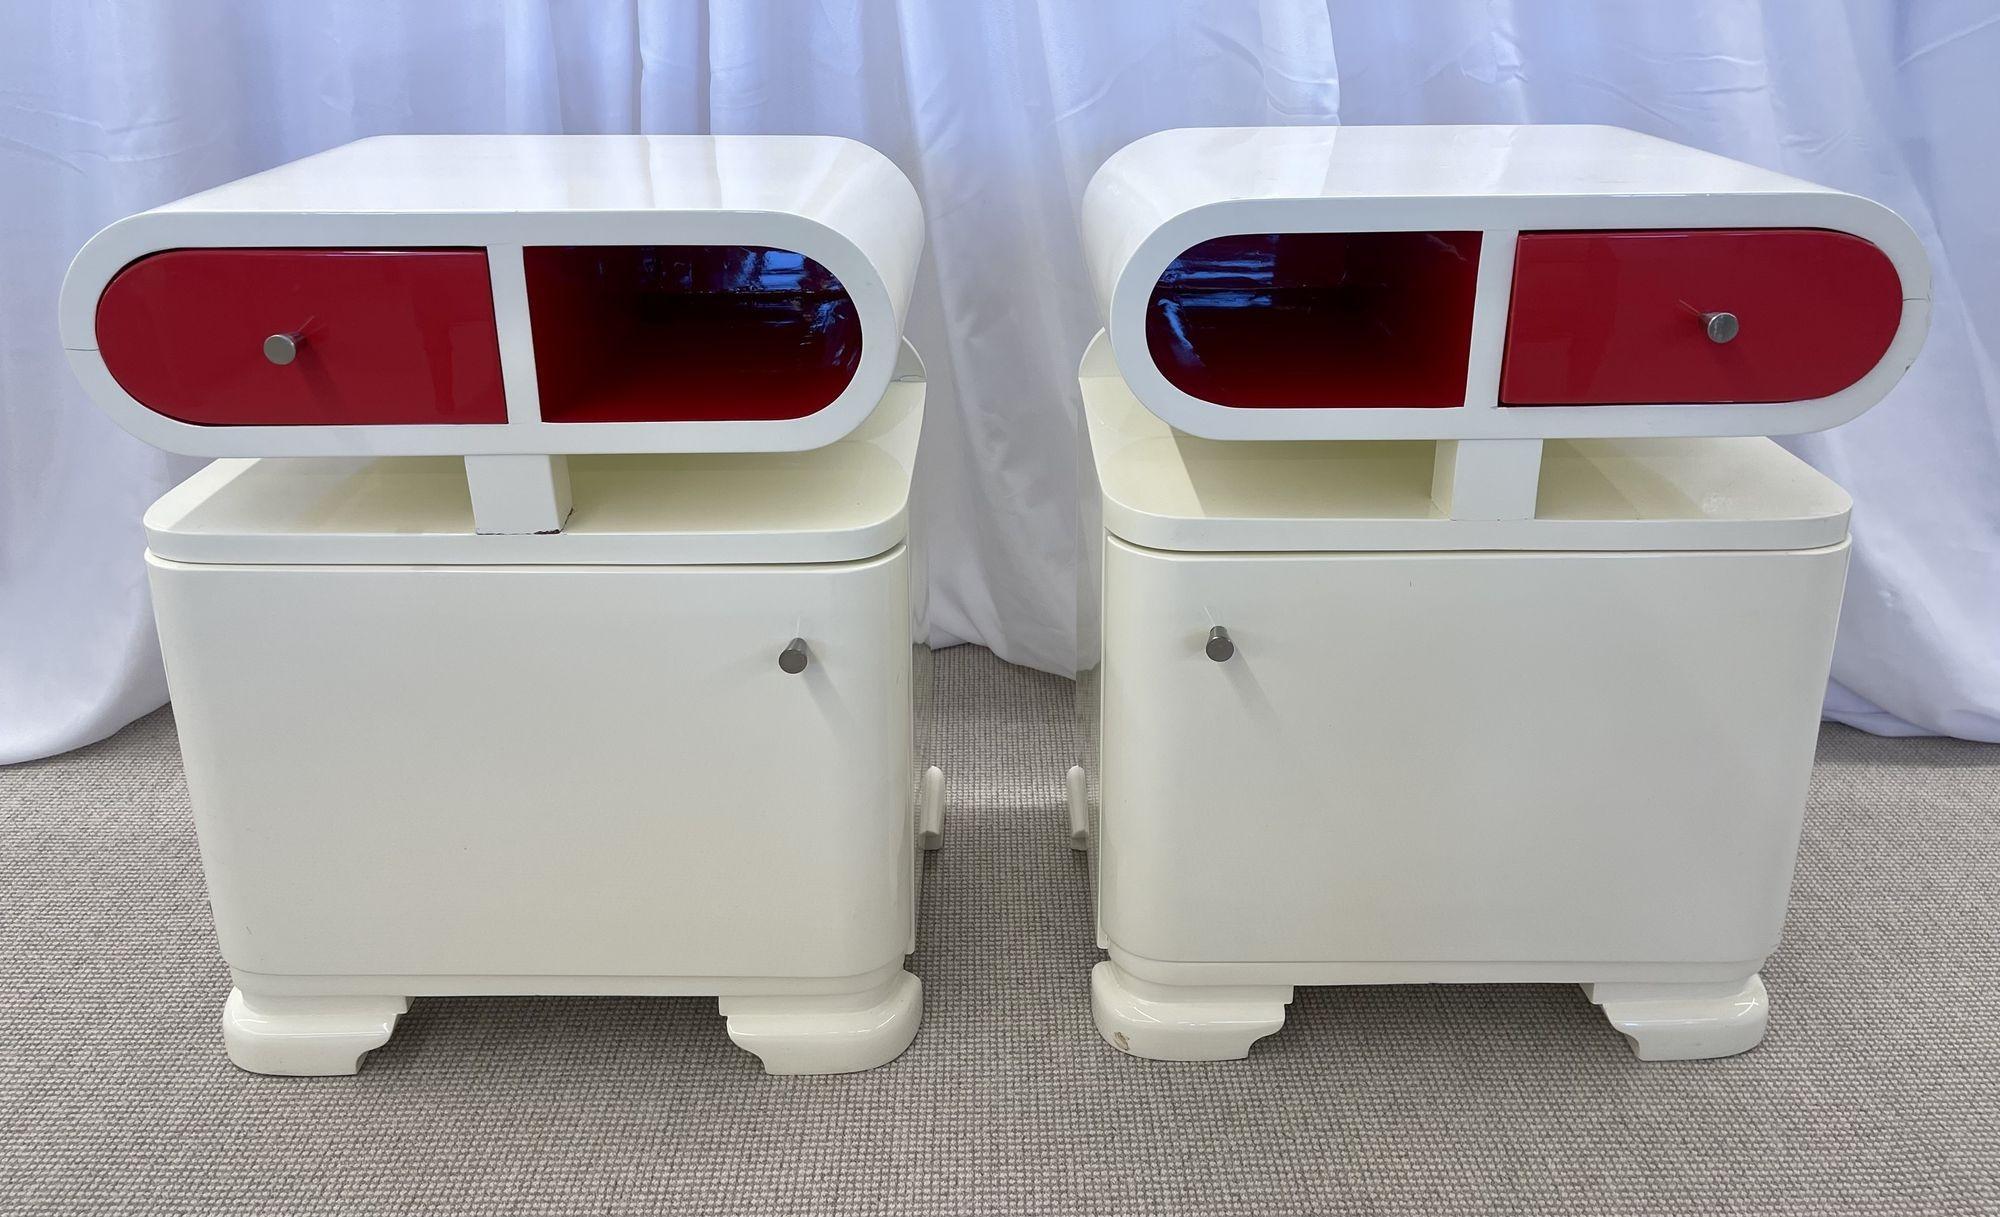 American Pair of Art Deco Nightstands / End Tables, Lacquer, Space Age Modern Style